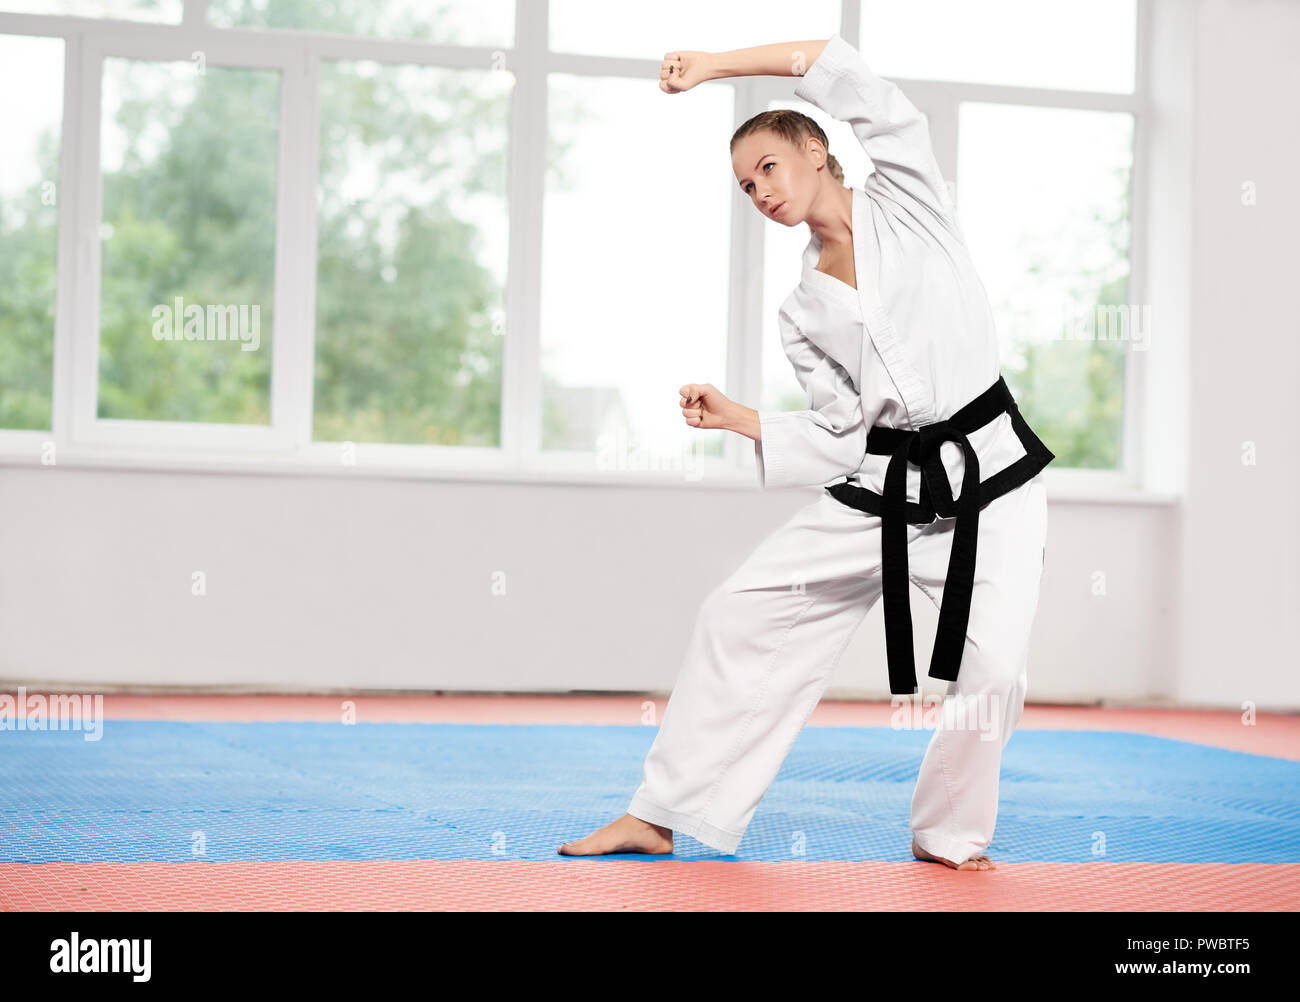 Blonde girl wearing in white kimono with black belt practicing martial arts at karate class. Professional female fighter perfecting karate position to improve quality of battle. Concept of sport. Stock Photo